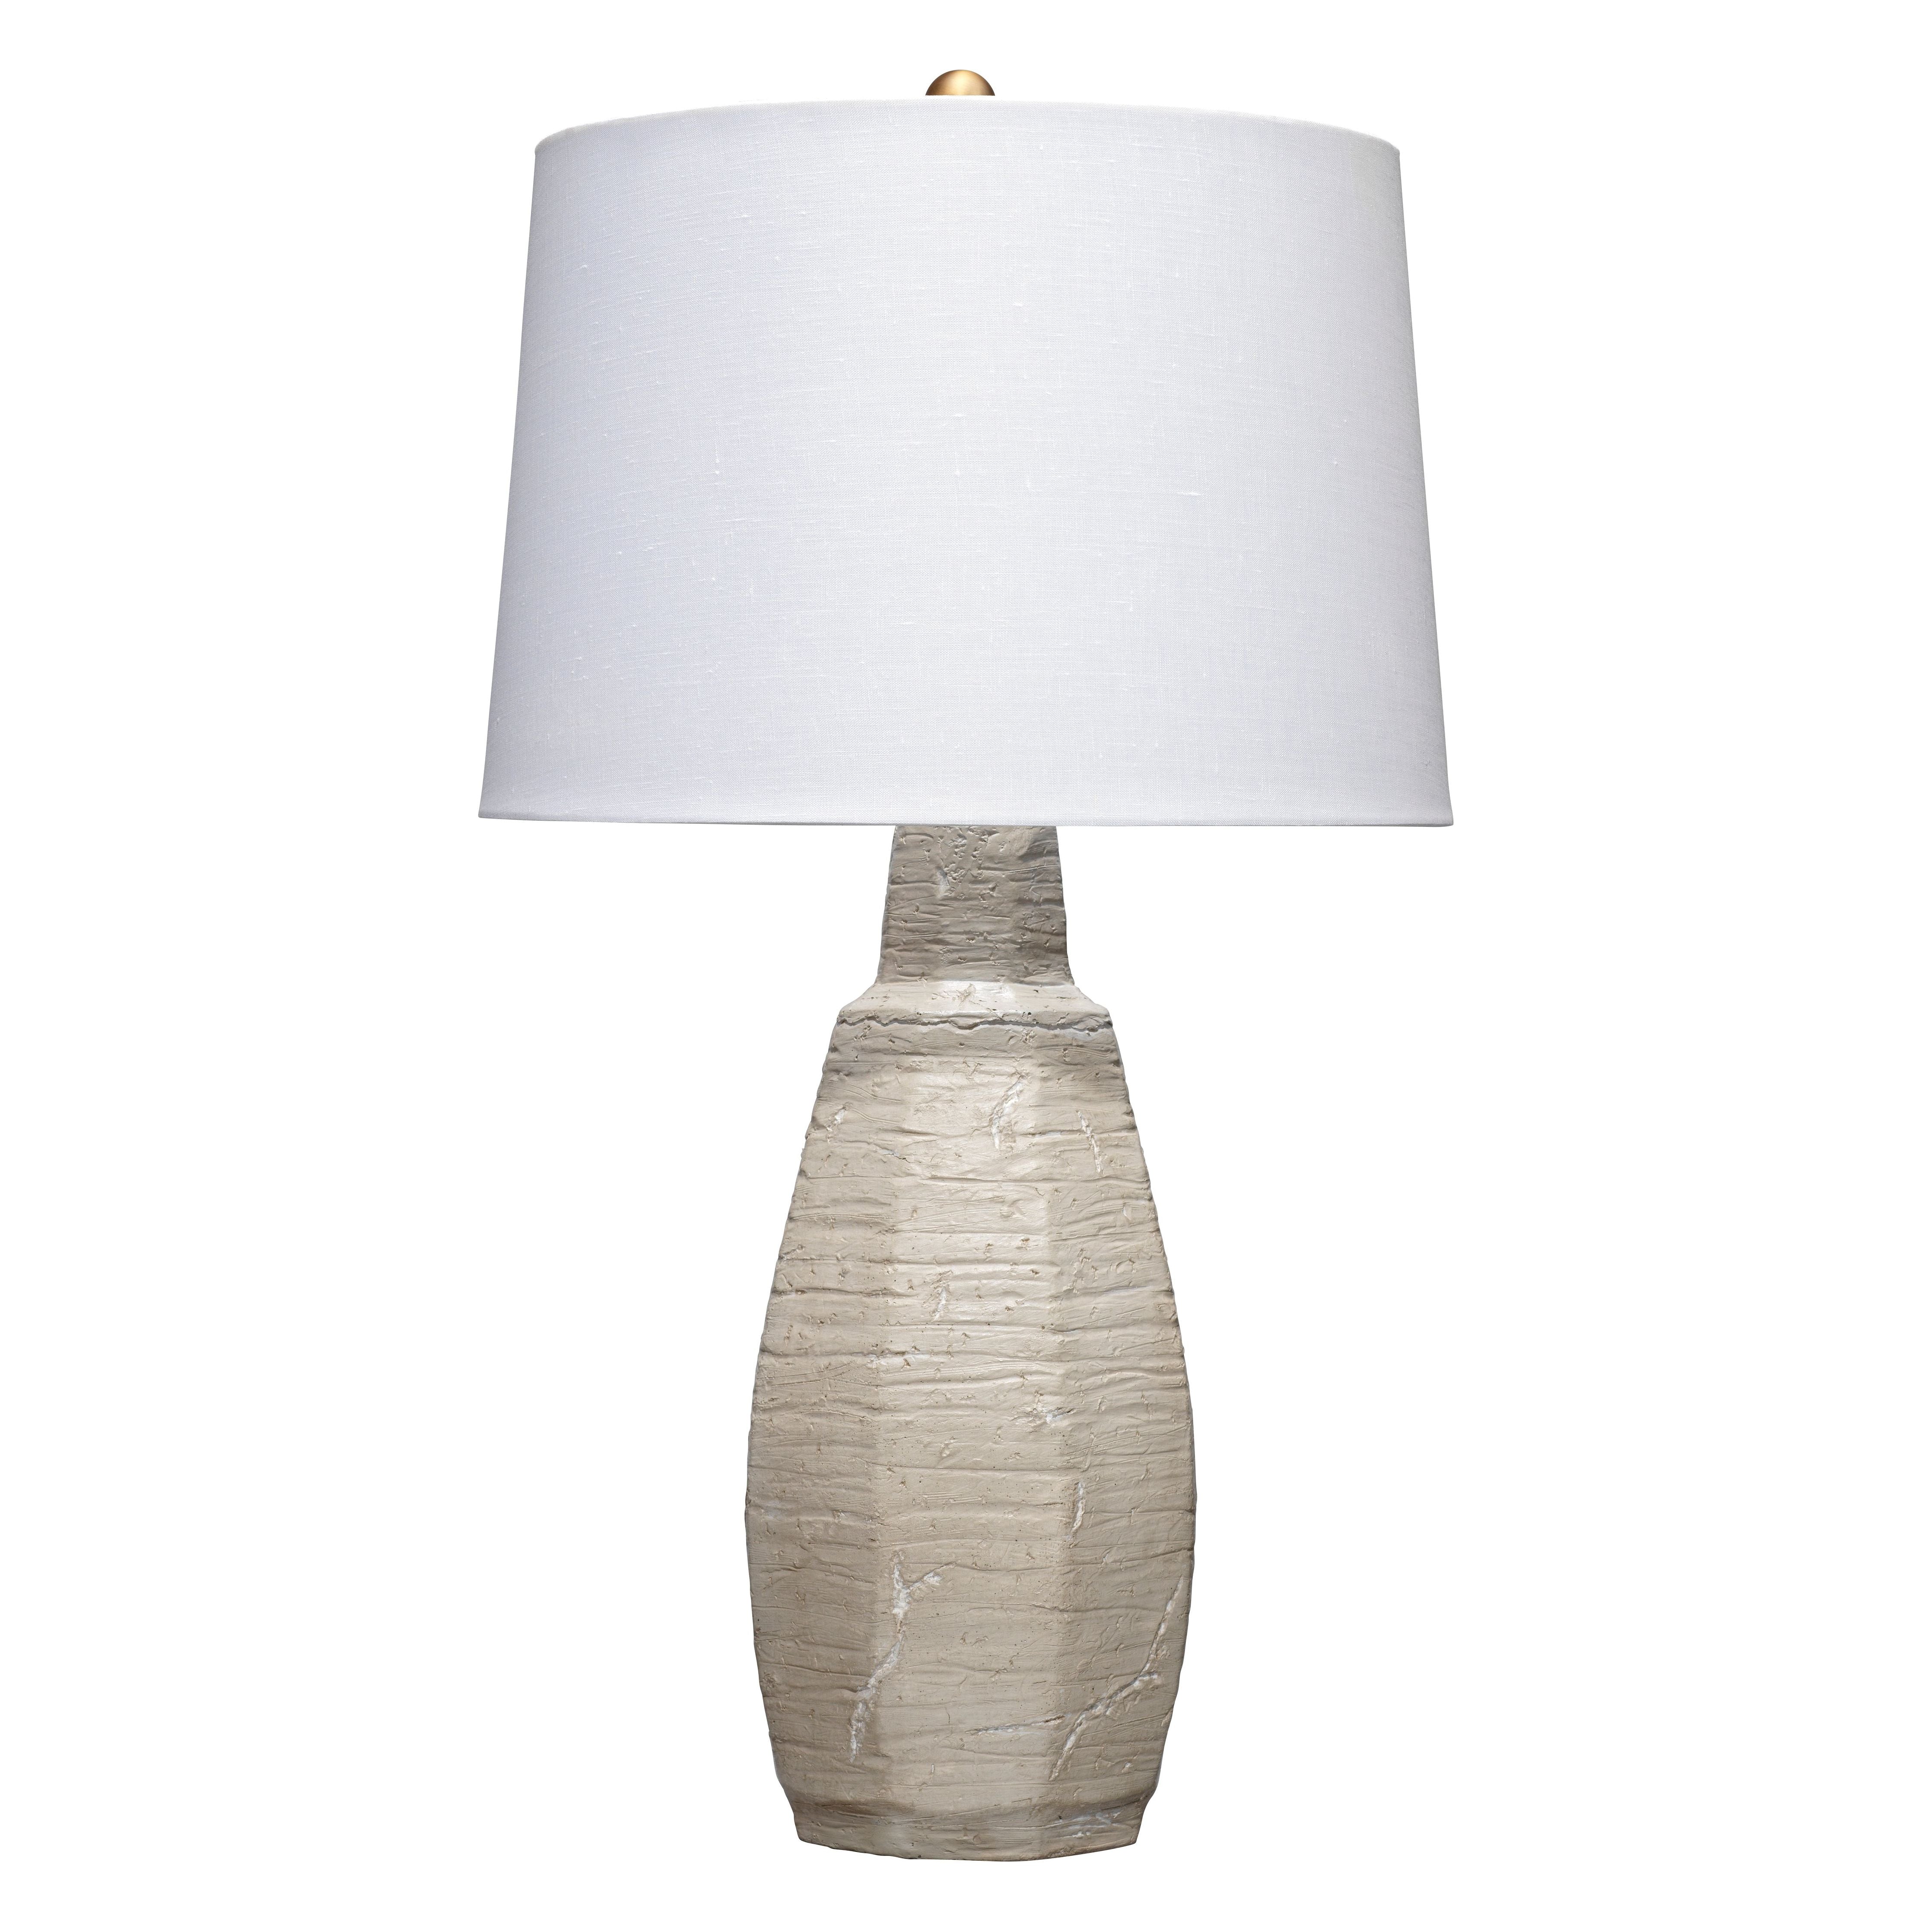 Jamie Young Company - LS9PARCHEDGR - Parched Table Lamp - Parched - Grey